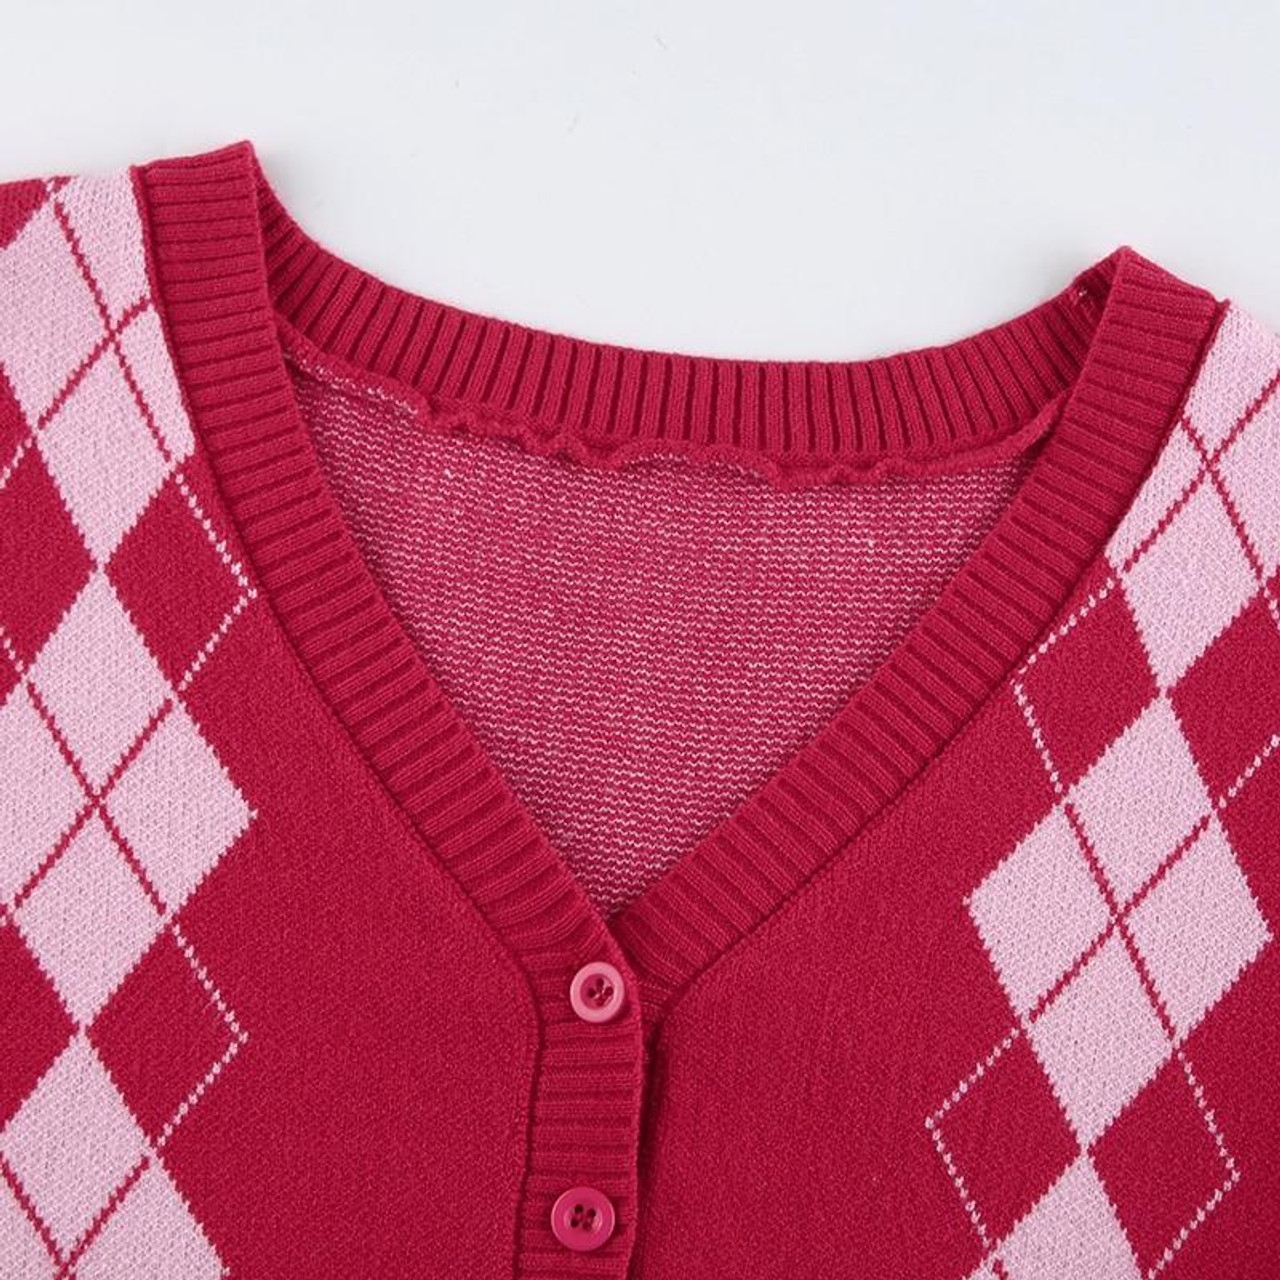 SOFT GIRL KNITTED CARDIGAN SWEATER - Cosmique Studio